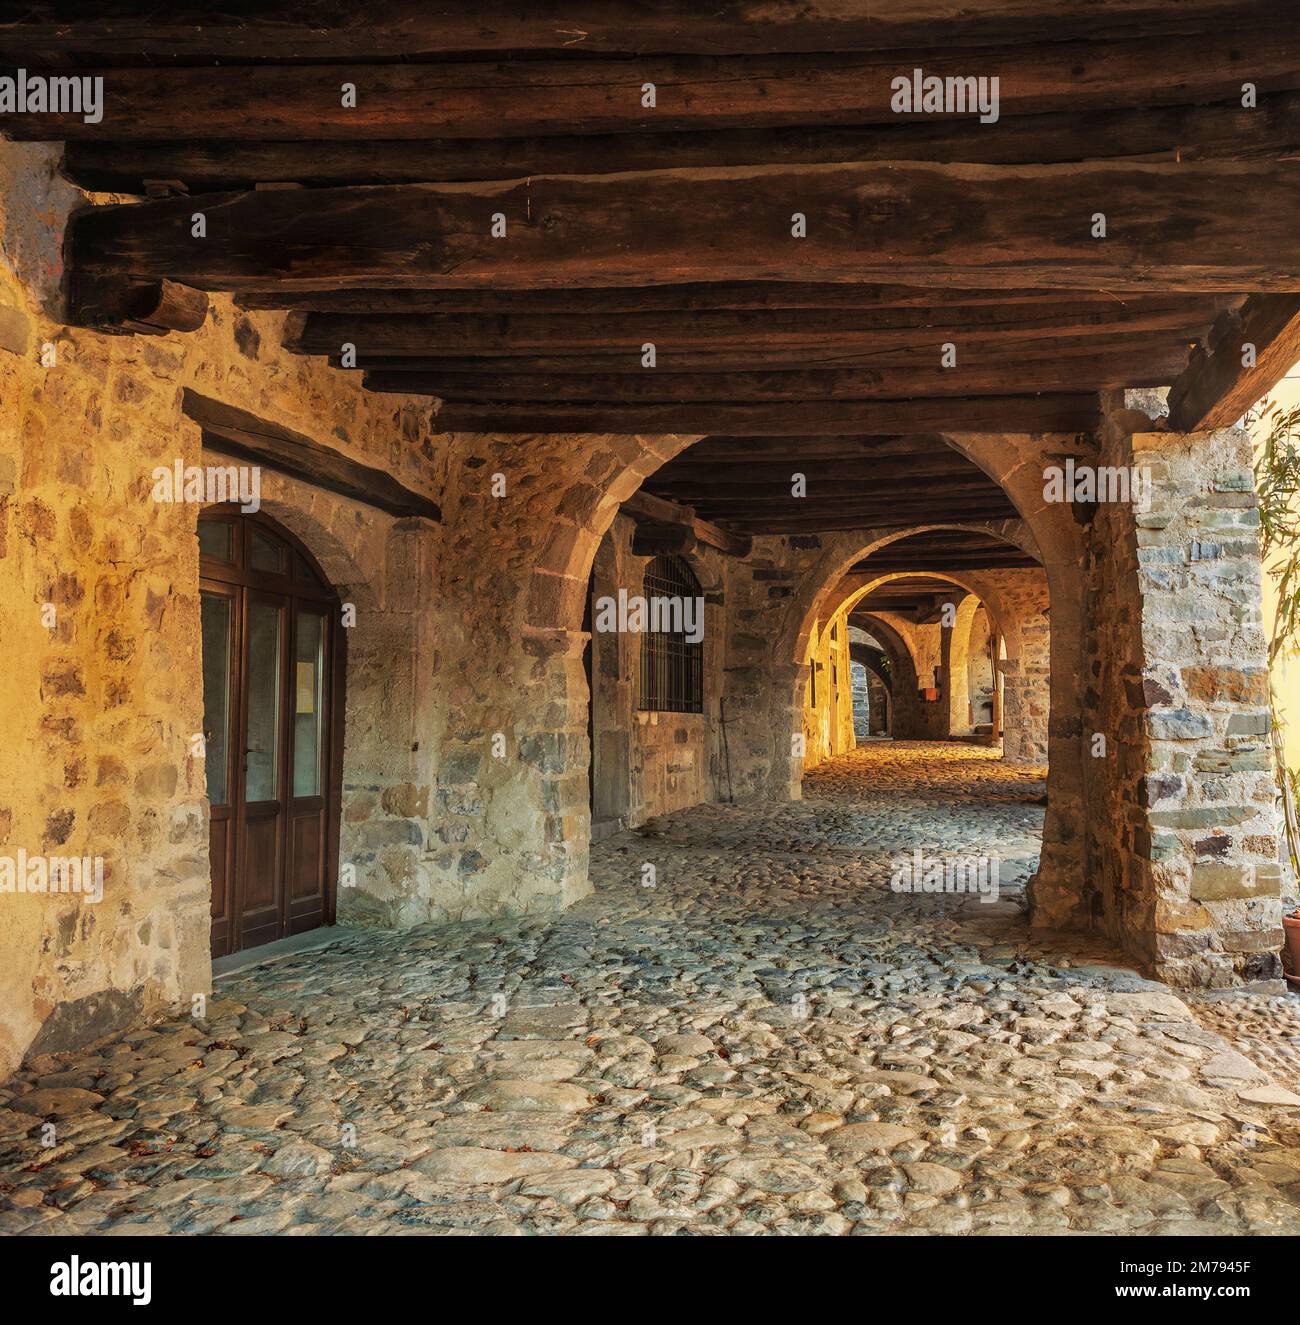 stone porch and wooden beam ceiling create a warm and intimate atmosphere in an ancient mountain village Stock Photo